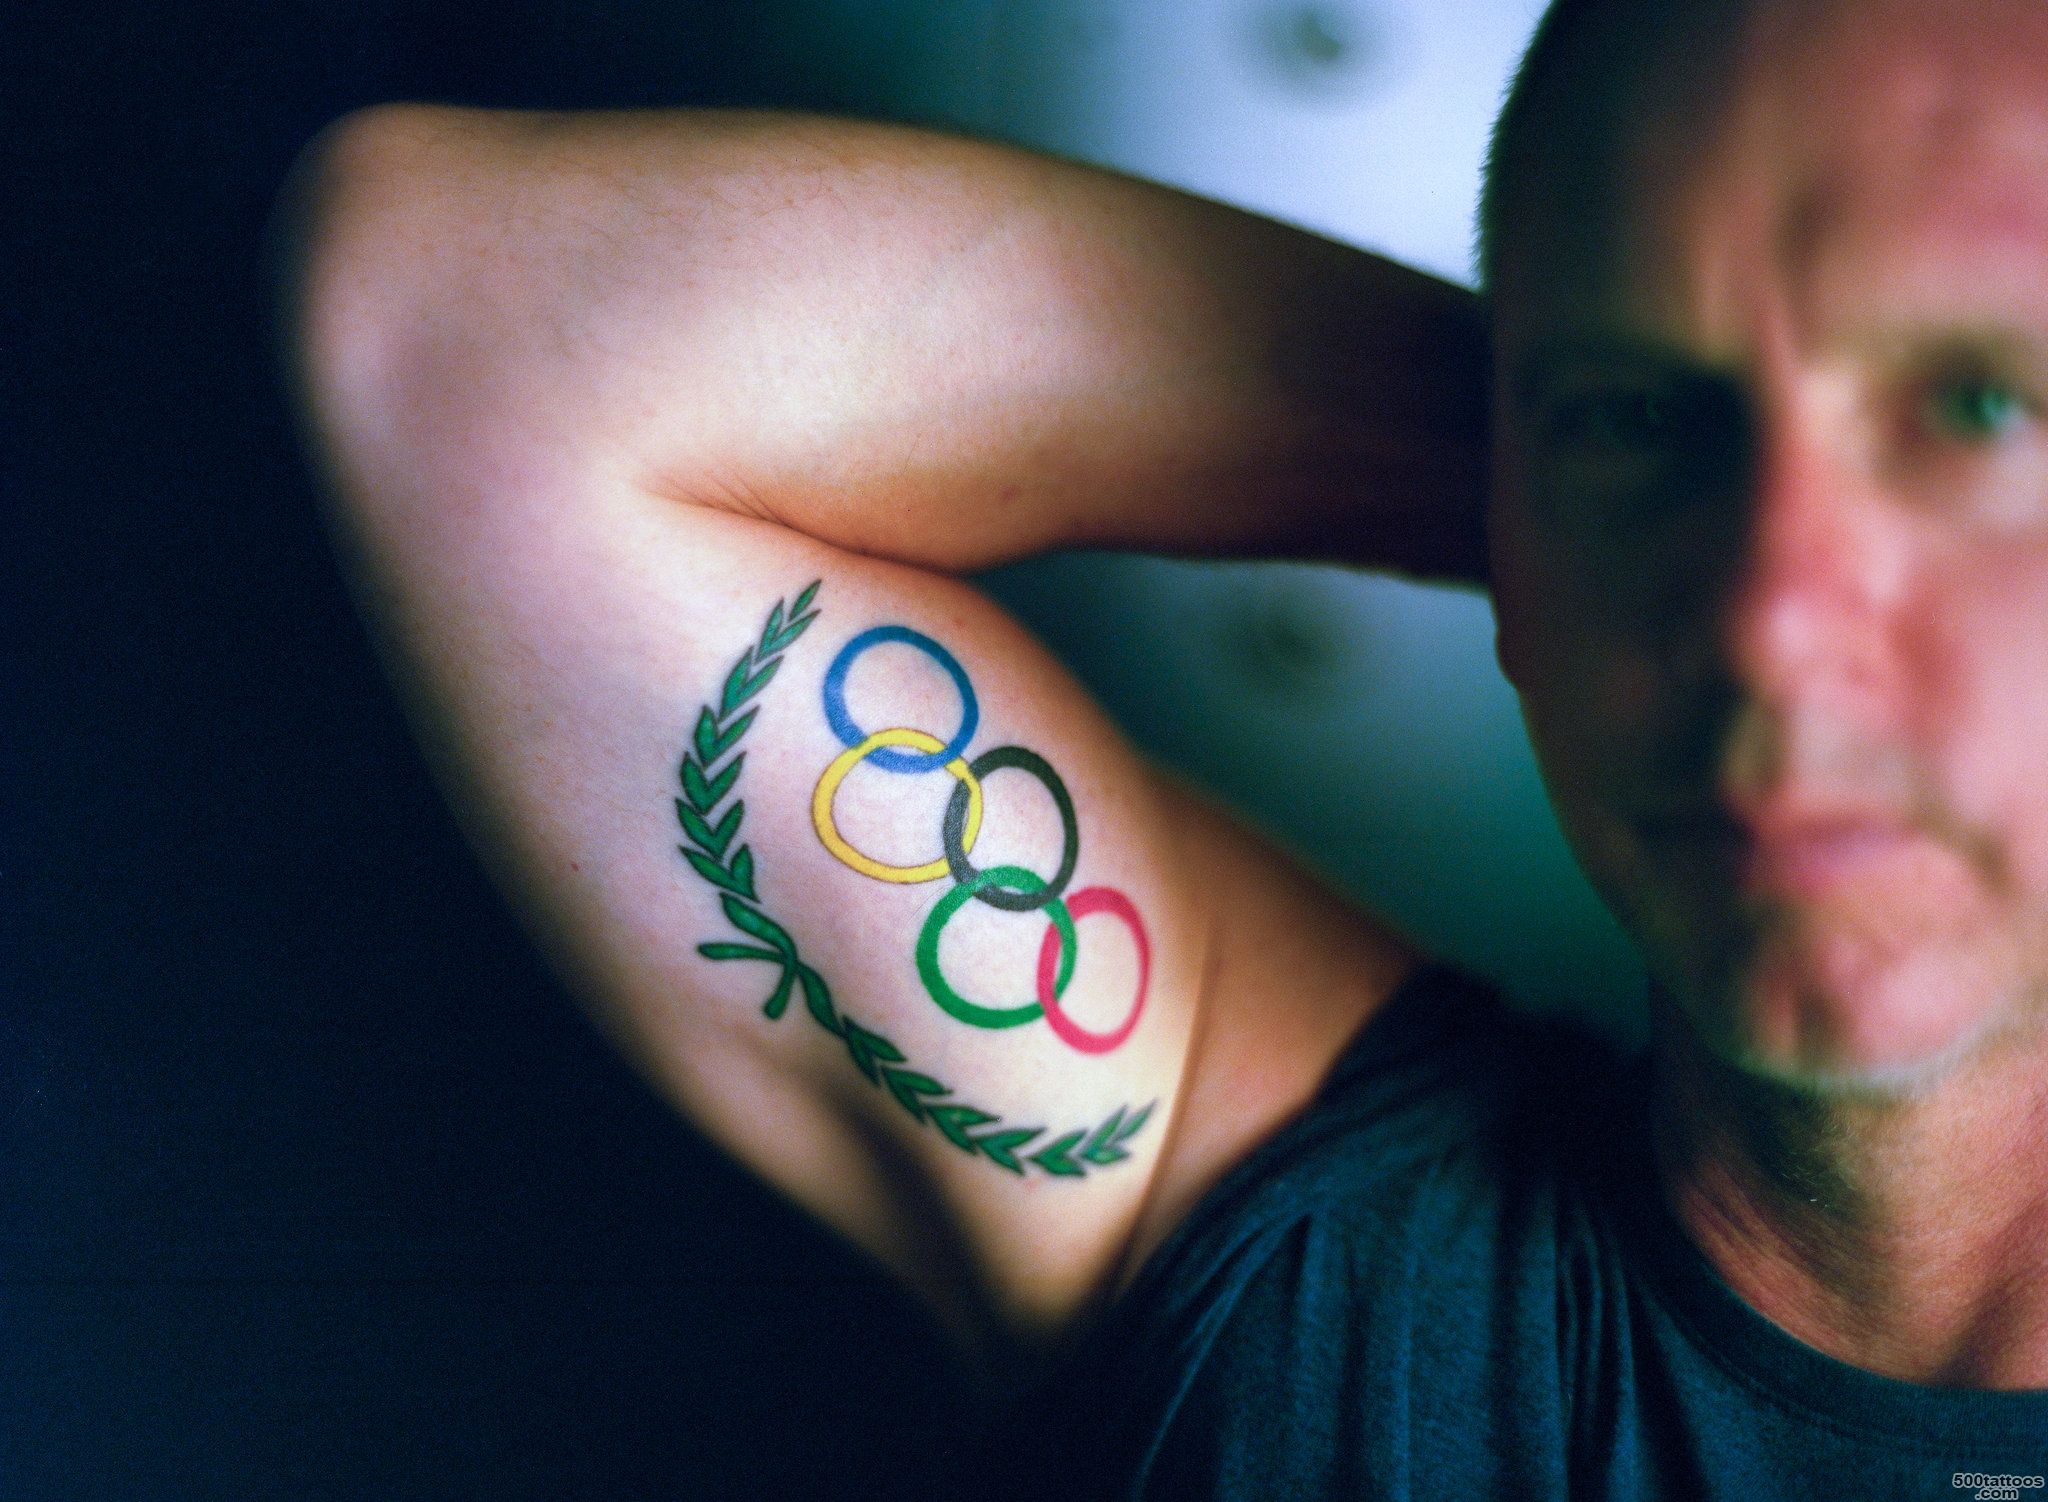 For U.S. Swimmers, Olympic Rings Tattoo Is Badge of Honor   The ..._13